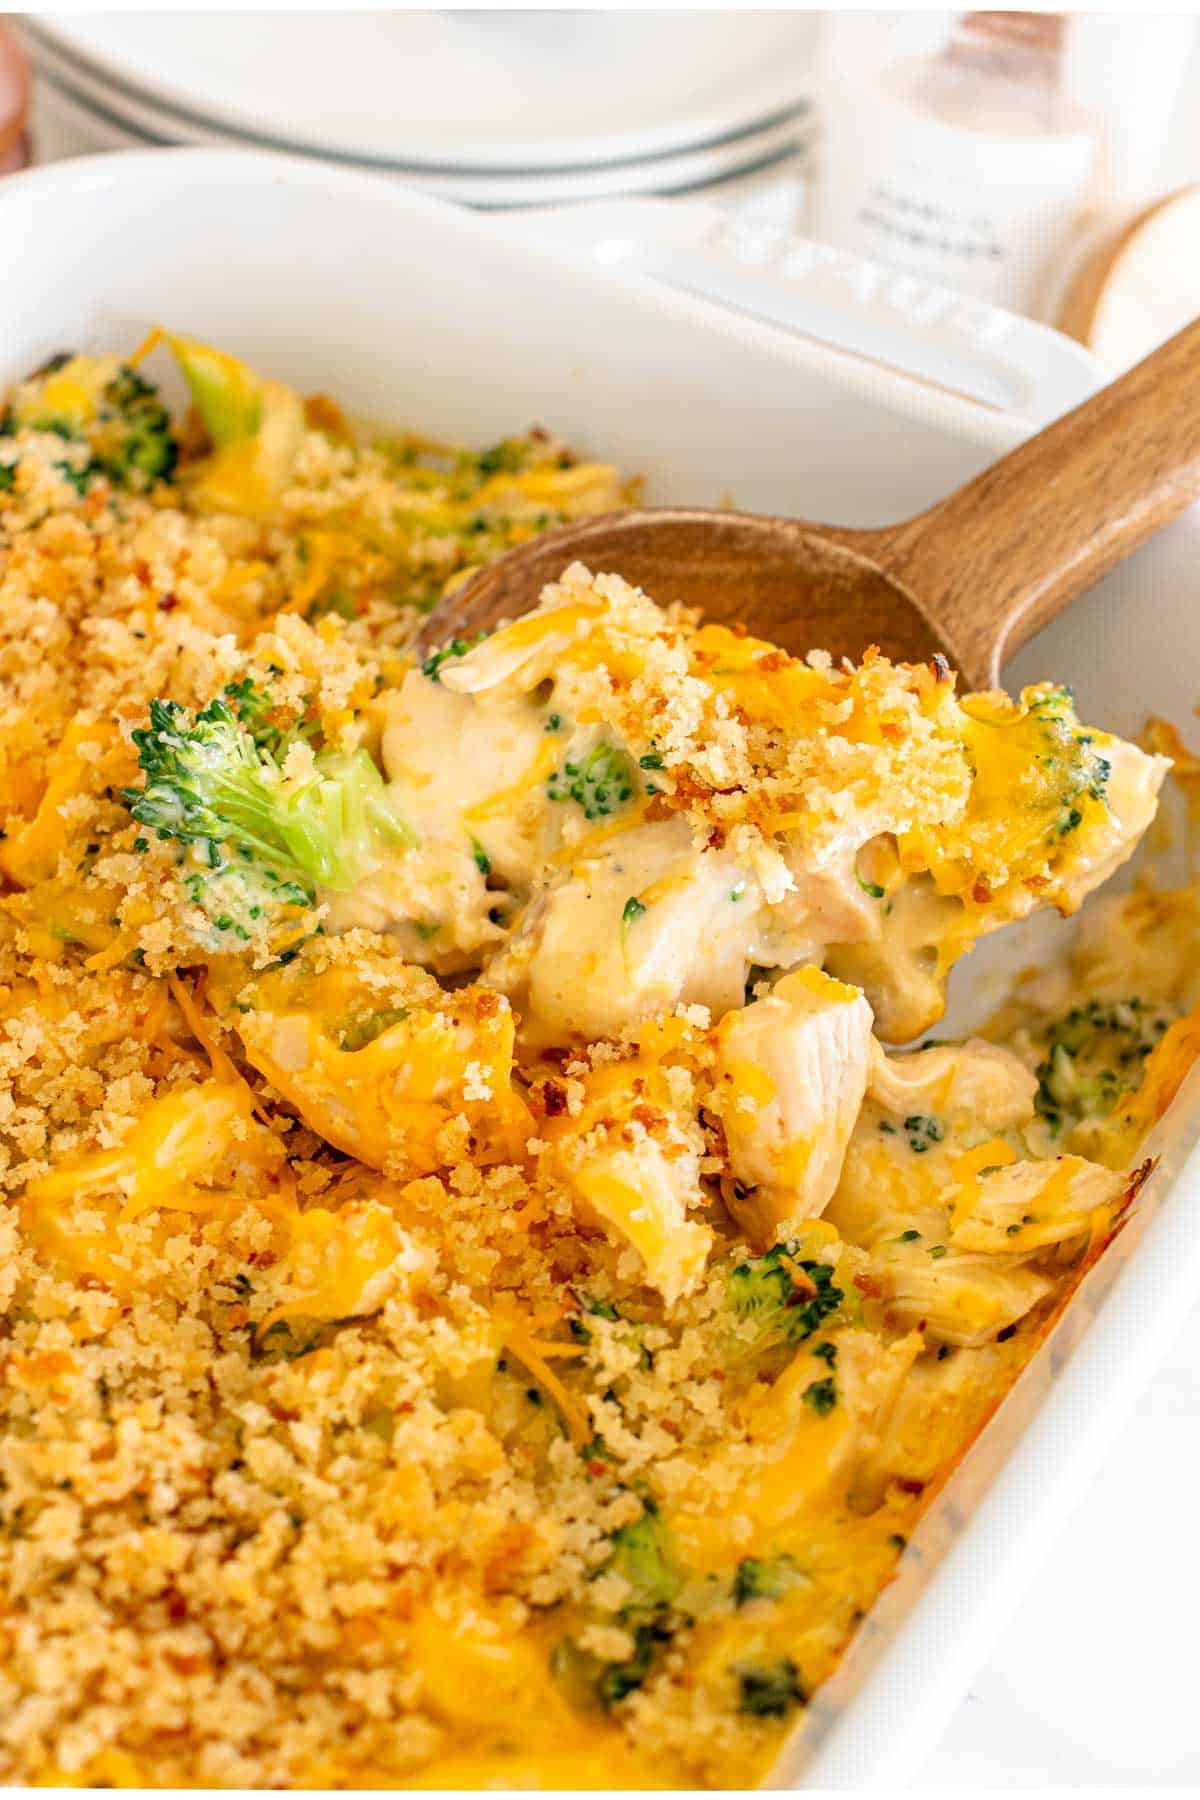 Chicken Divan - A dish of broccoli and cheese casserole with a wooden spoon.